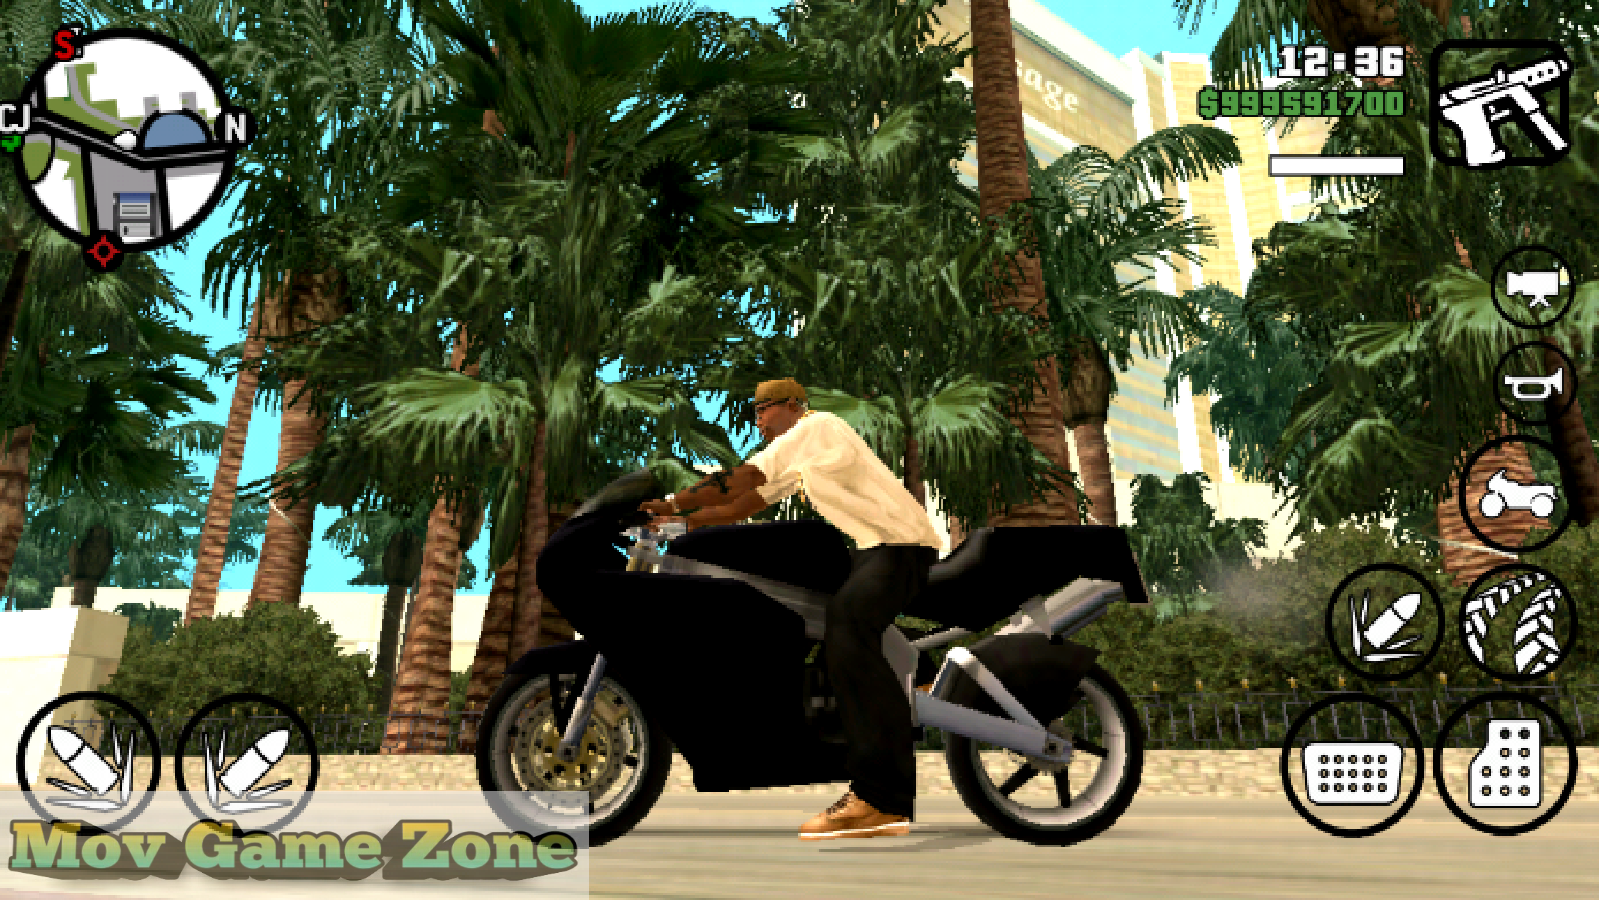 Download Gta San Andreas For Ppsspp Emulator Highly Compressed